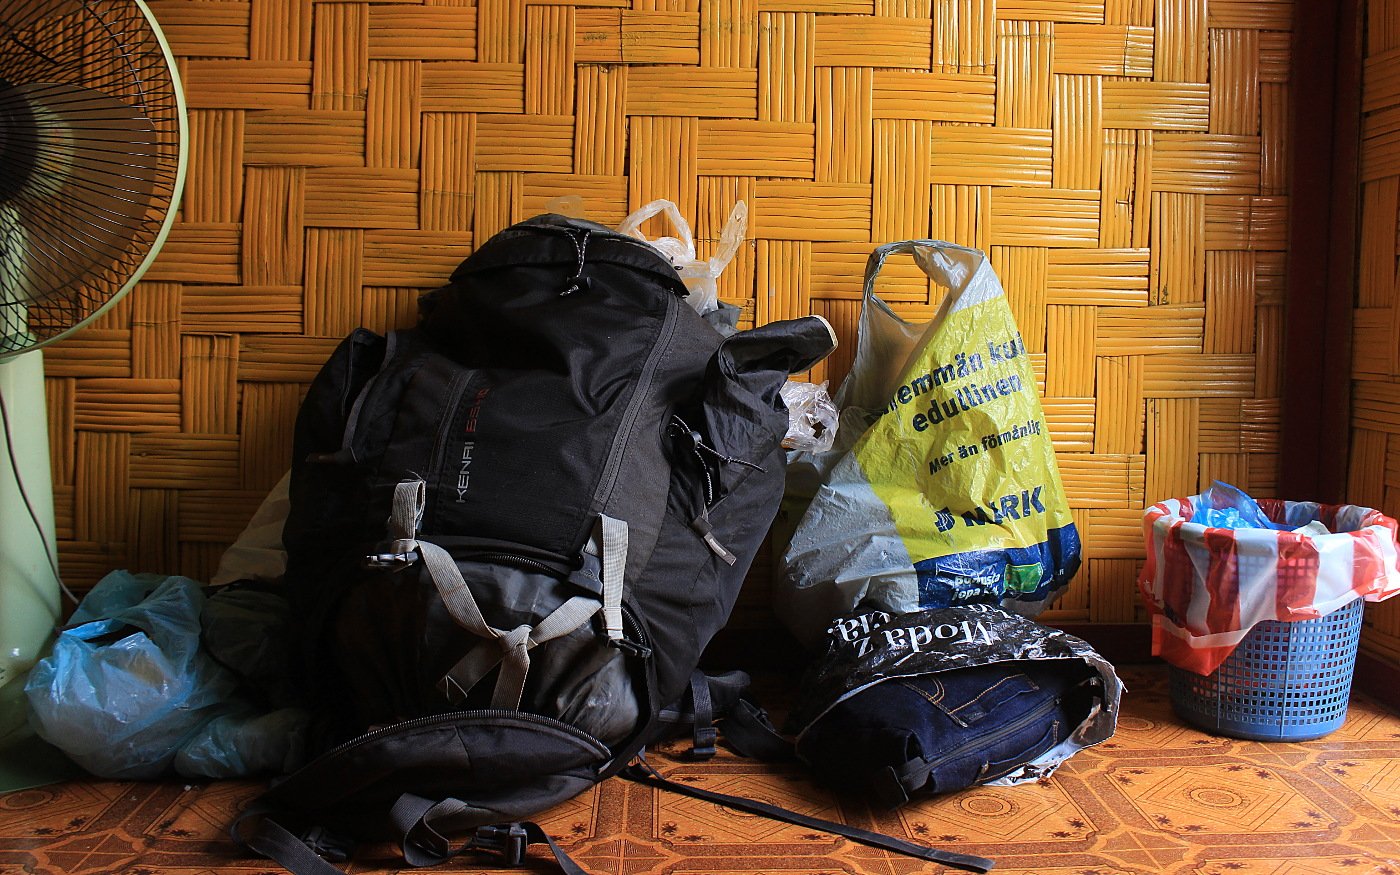 The least useful things to pack for a RTW trip